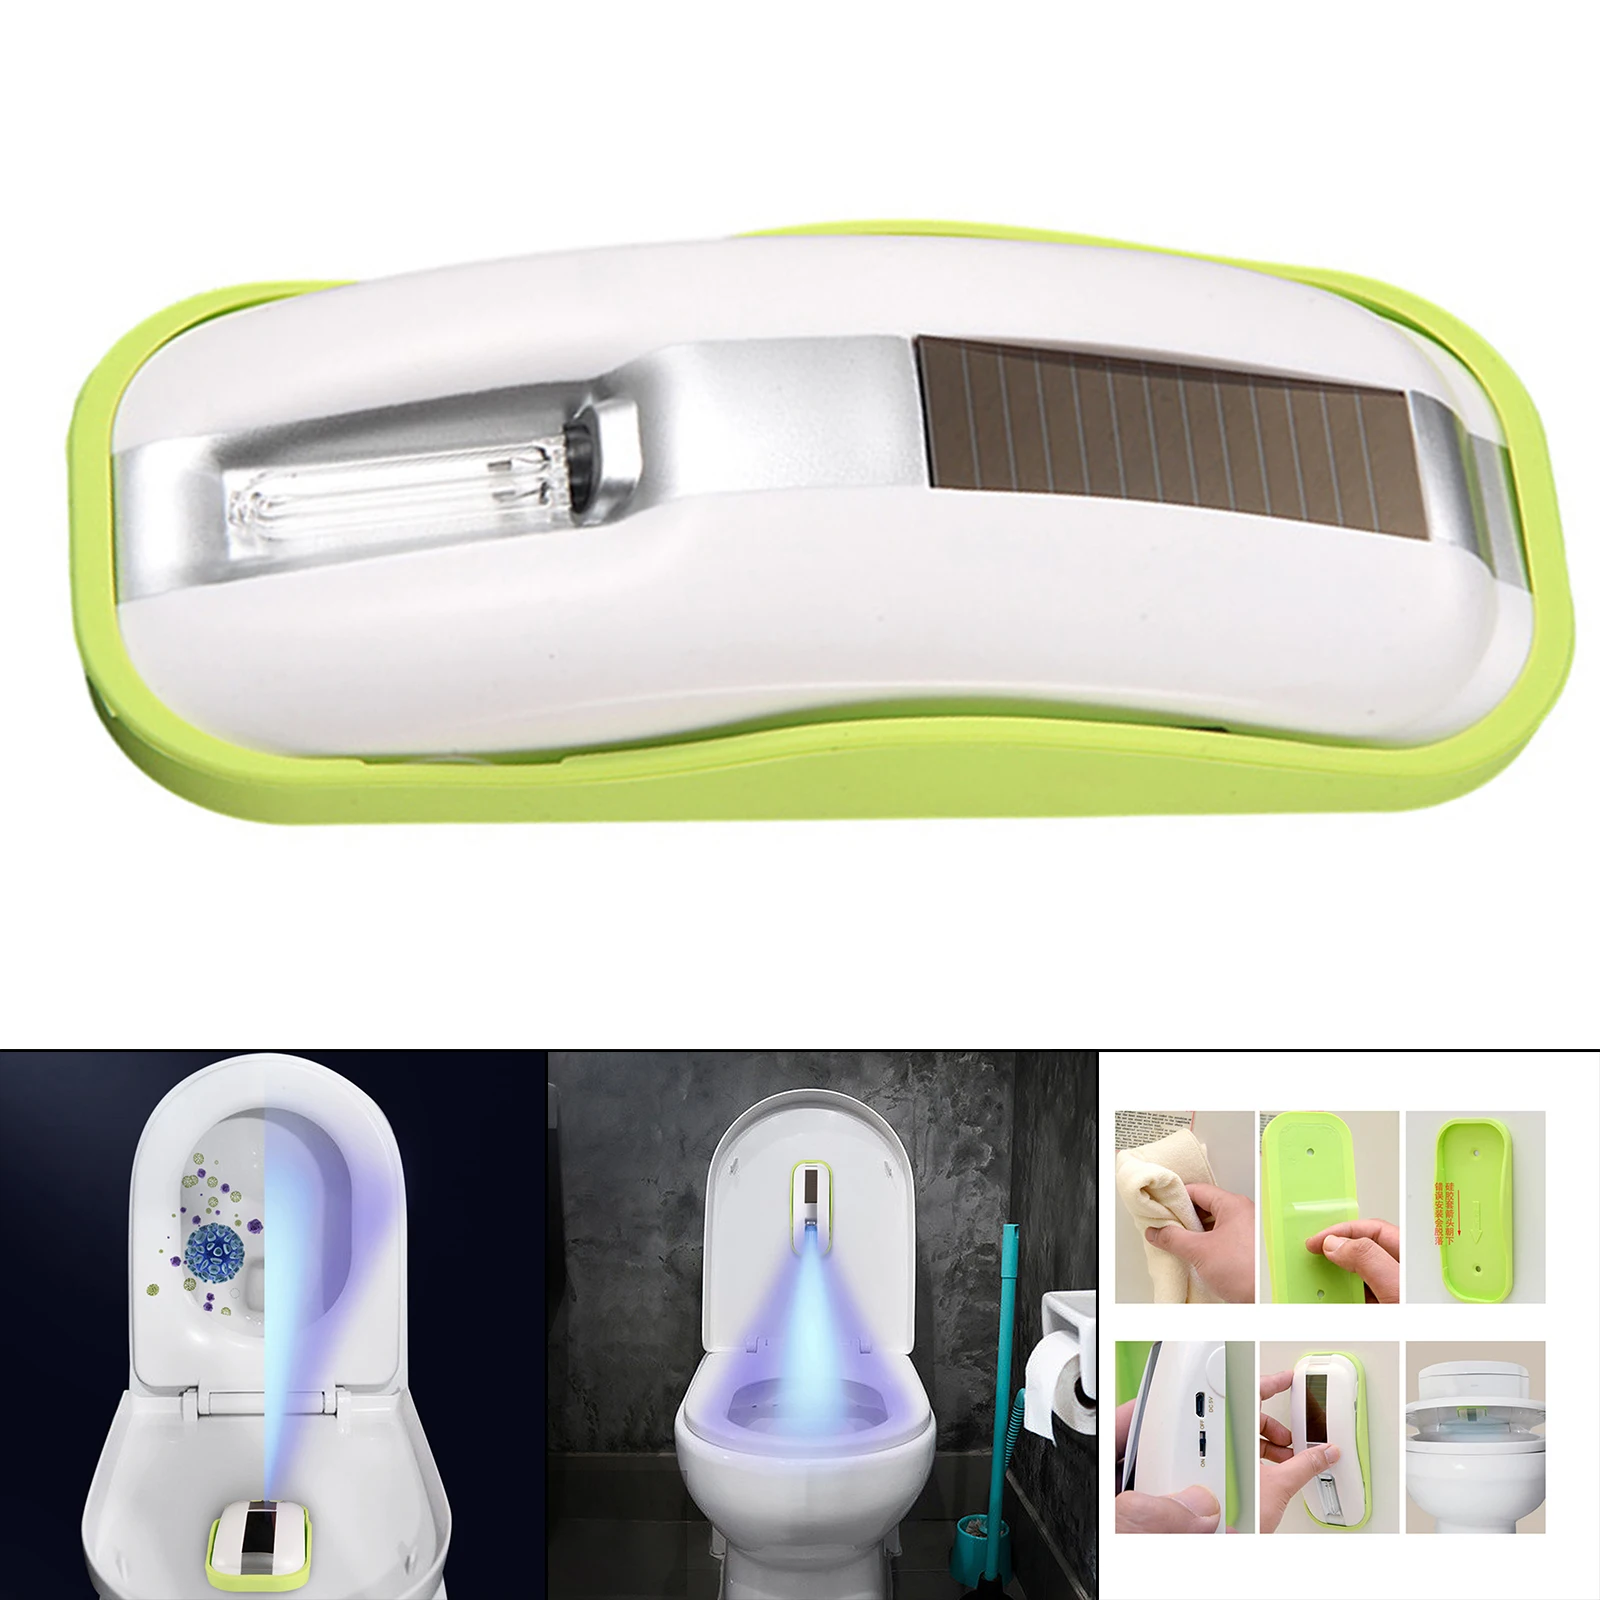 Toilet UV Light Sterilizer, Disinfection Light, USB Charging UV-C Disinfection Lamp, Ultraviolet Cleaning Gadget for Home Office